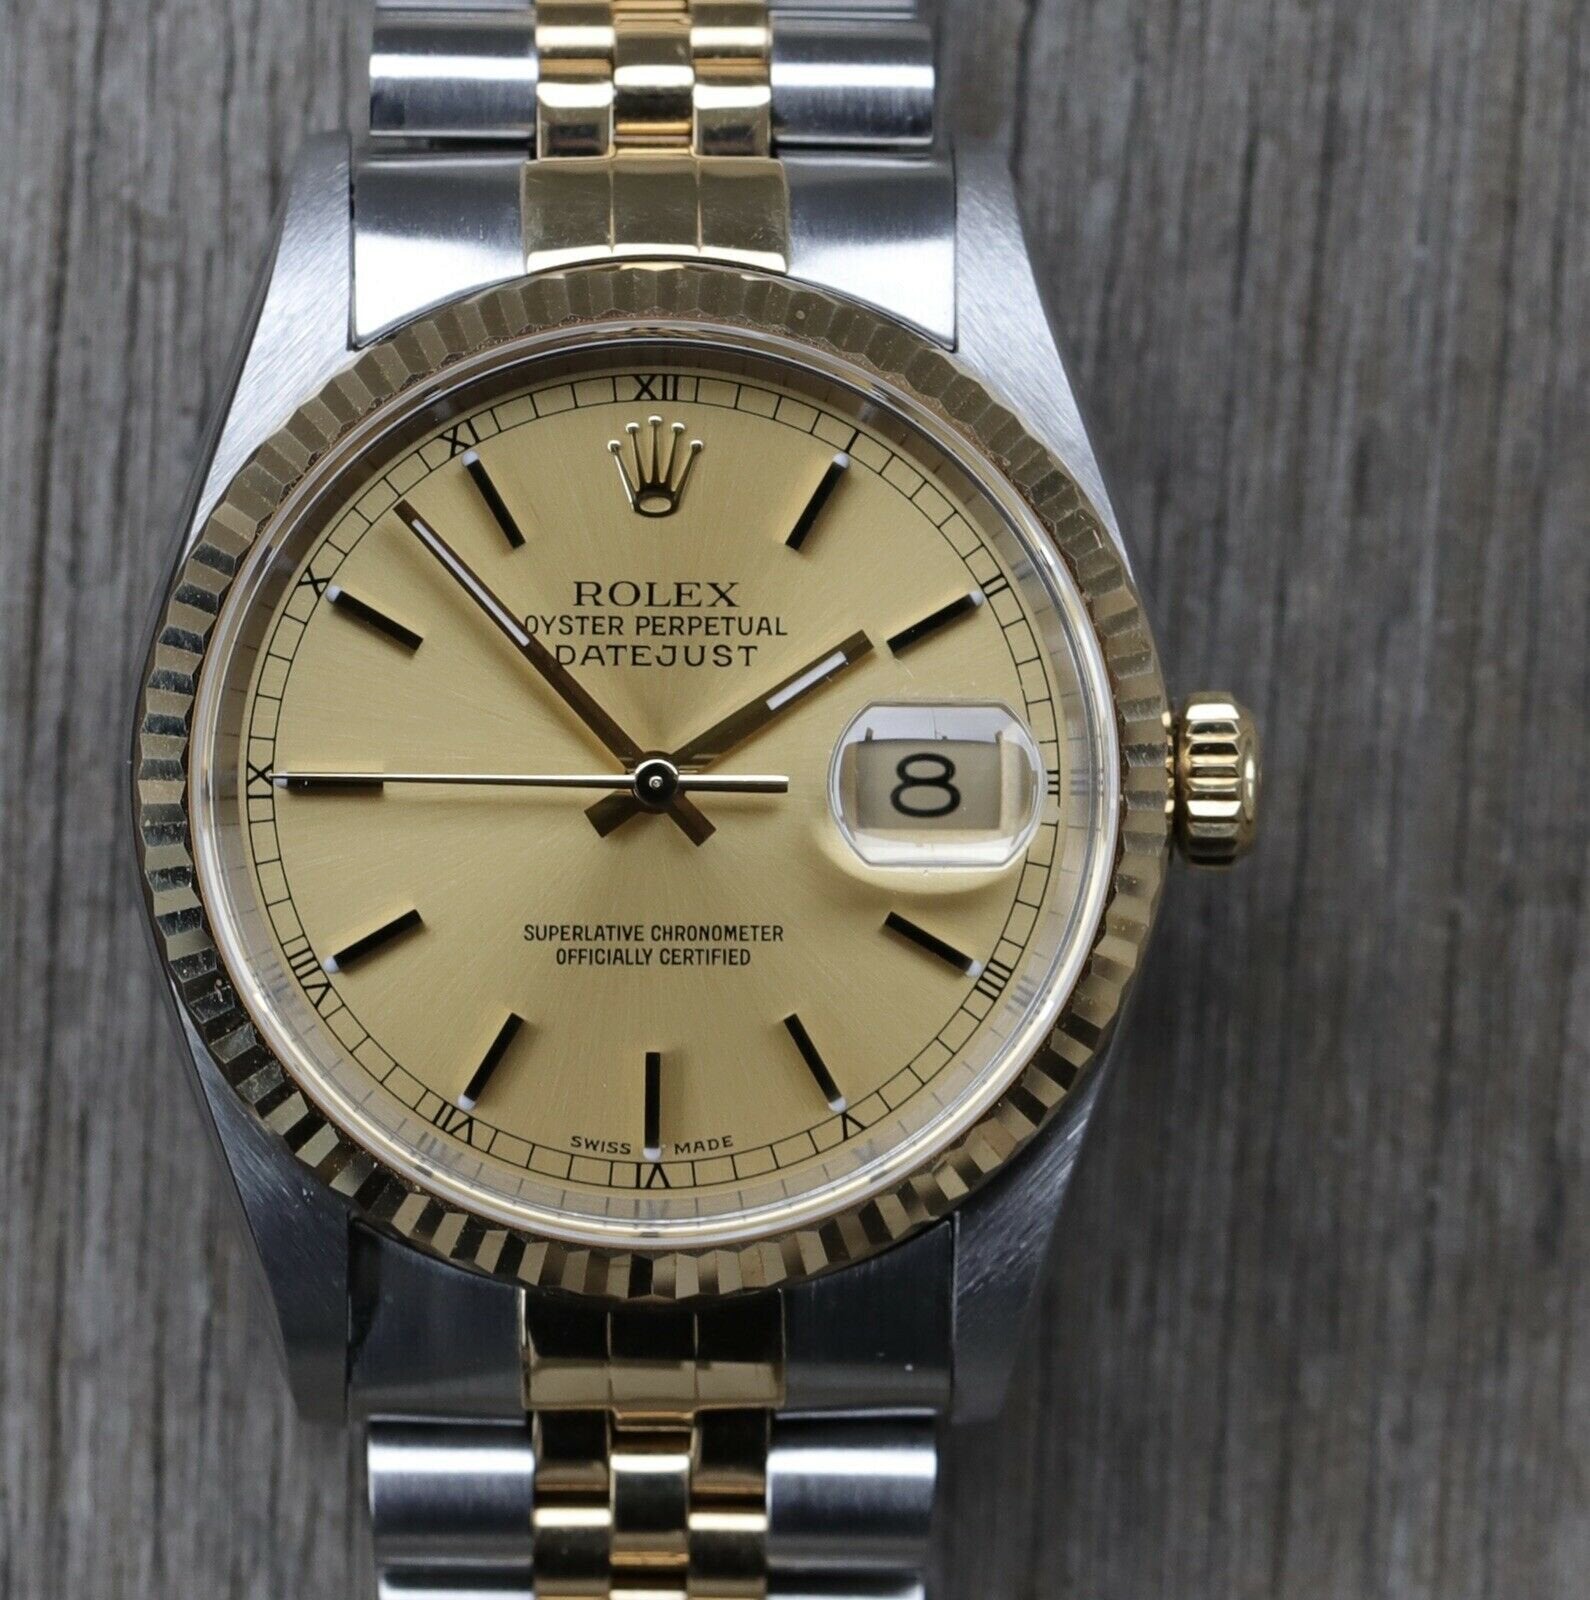 Rolex_Oyster_Perpetual_Datejust_SteelGold_36mm_I-Serial_16233_-_2001_Watch_Vault_12.jpg